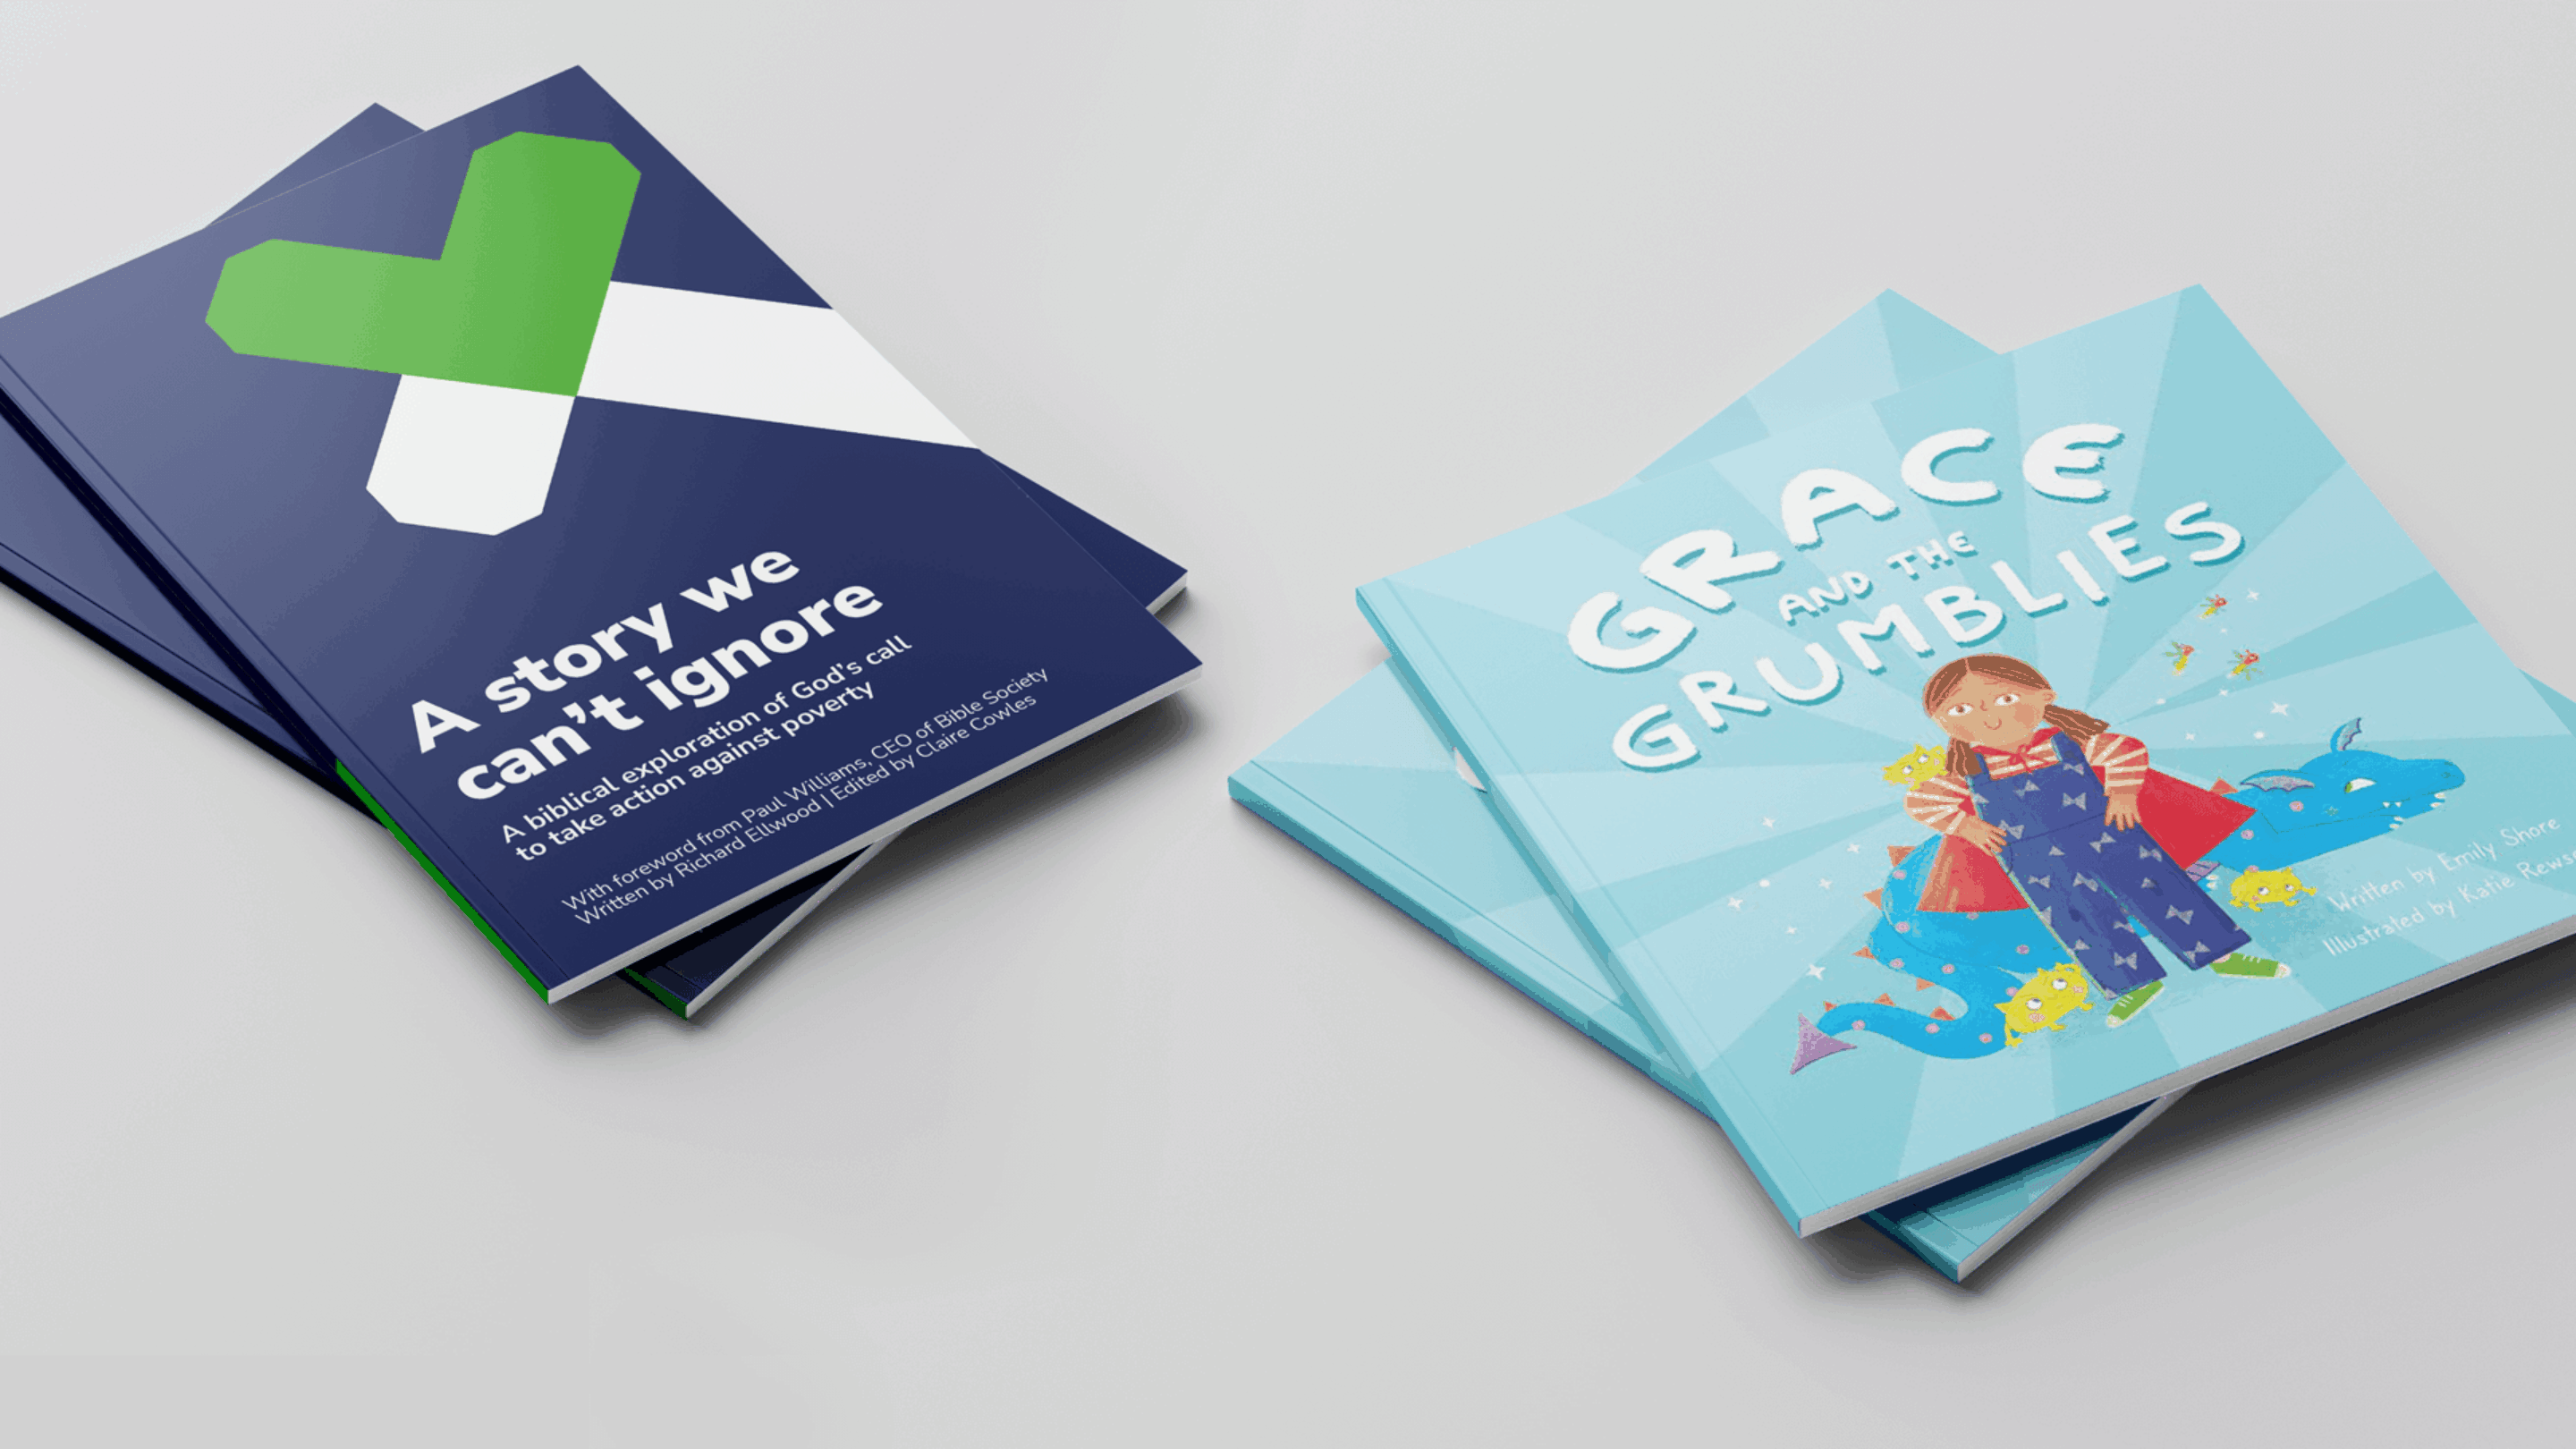 The front covers of CAP's two books: 'A story we can't ignore' and 'Grace and the Grumblies'